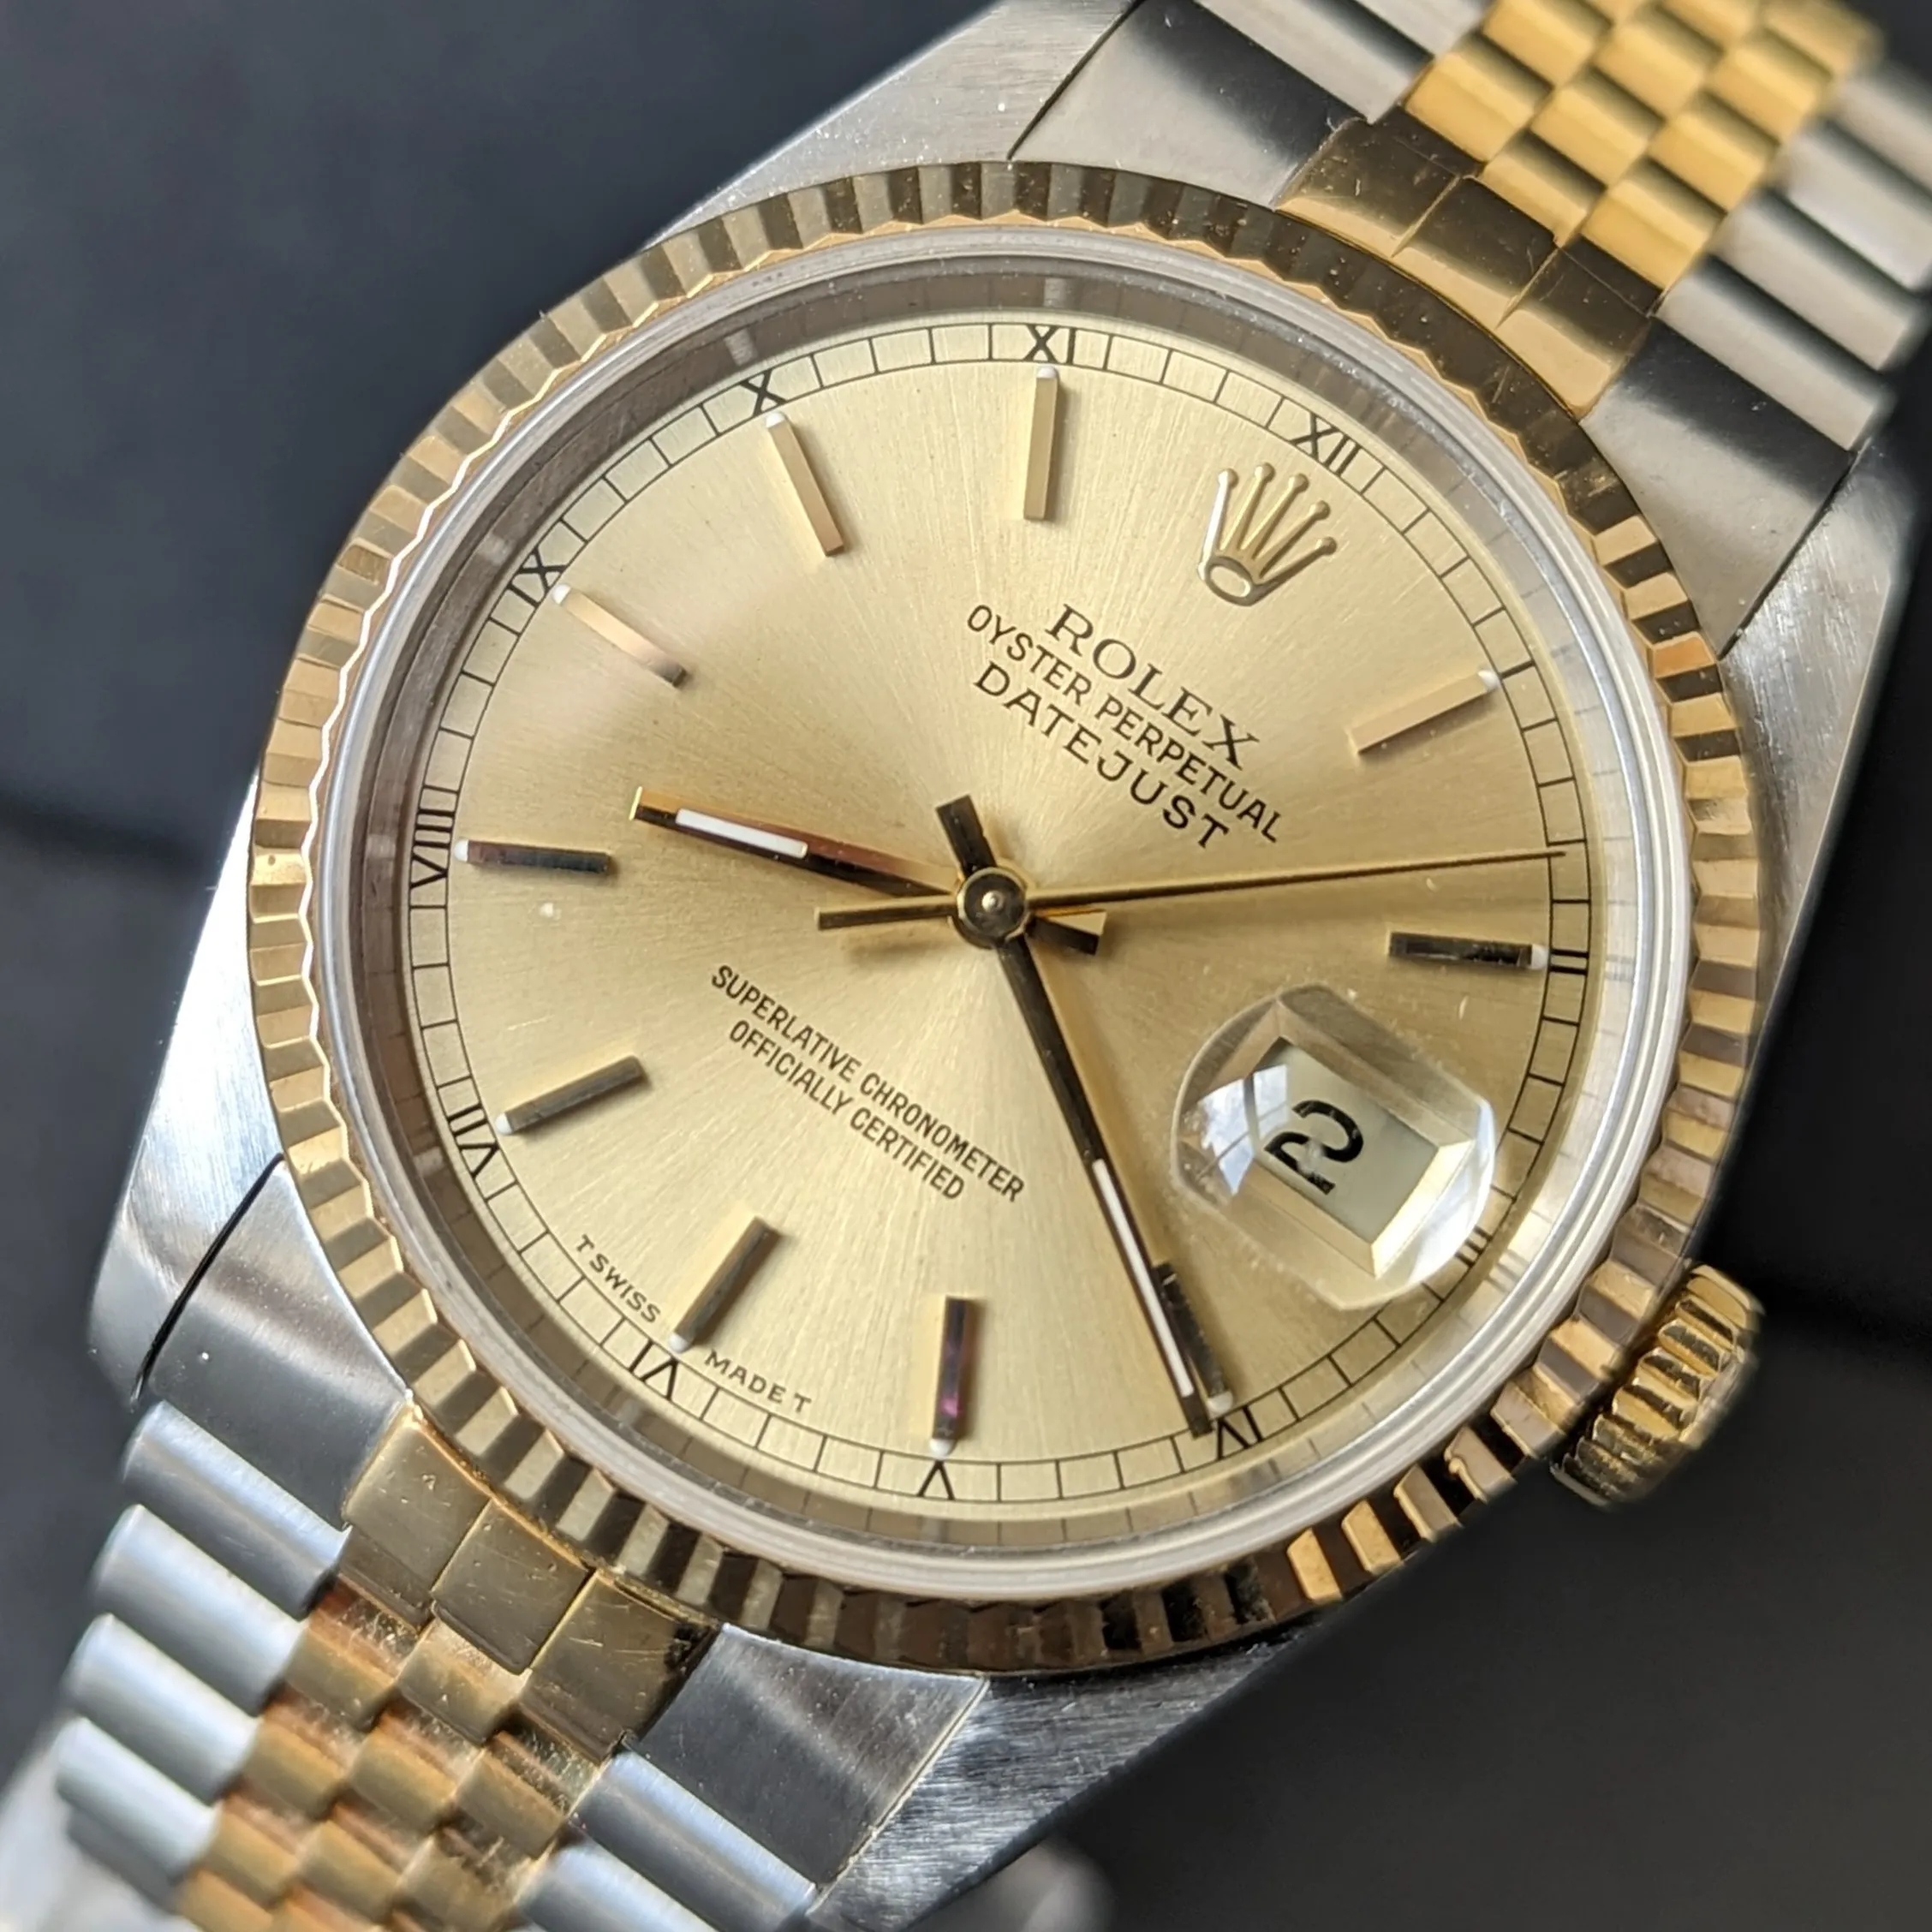 Exceptional value gents Rolex side